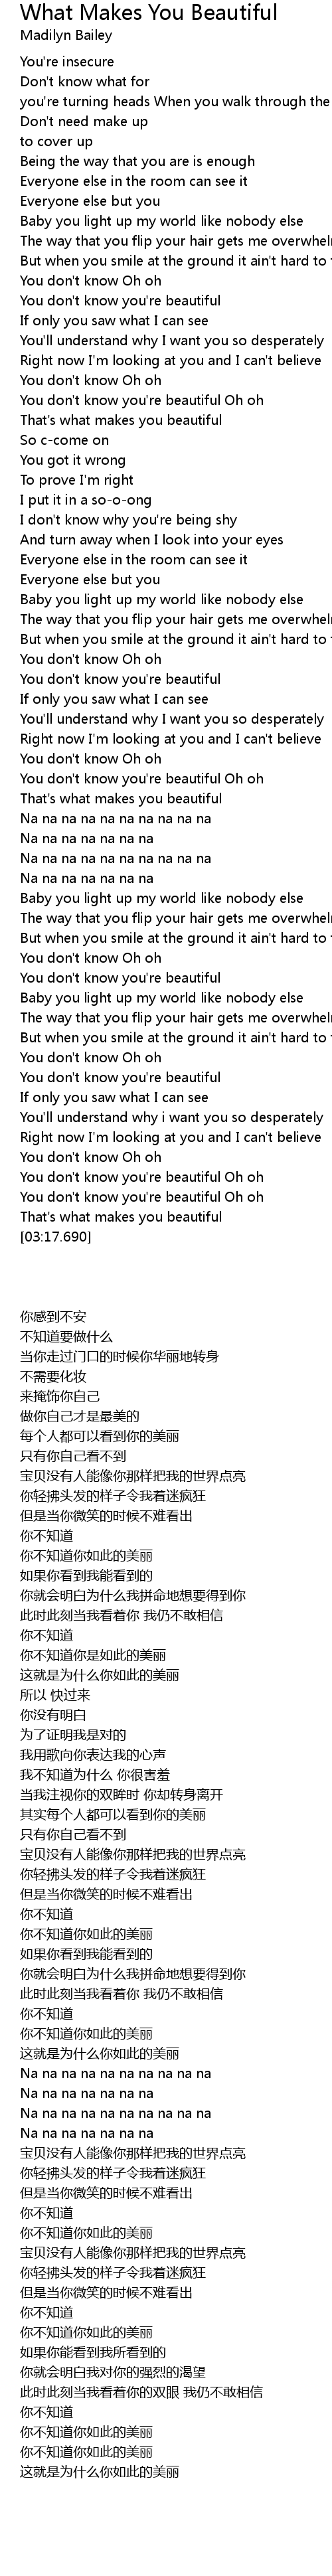 What Makes You Beautiful 歌詞 英語